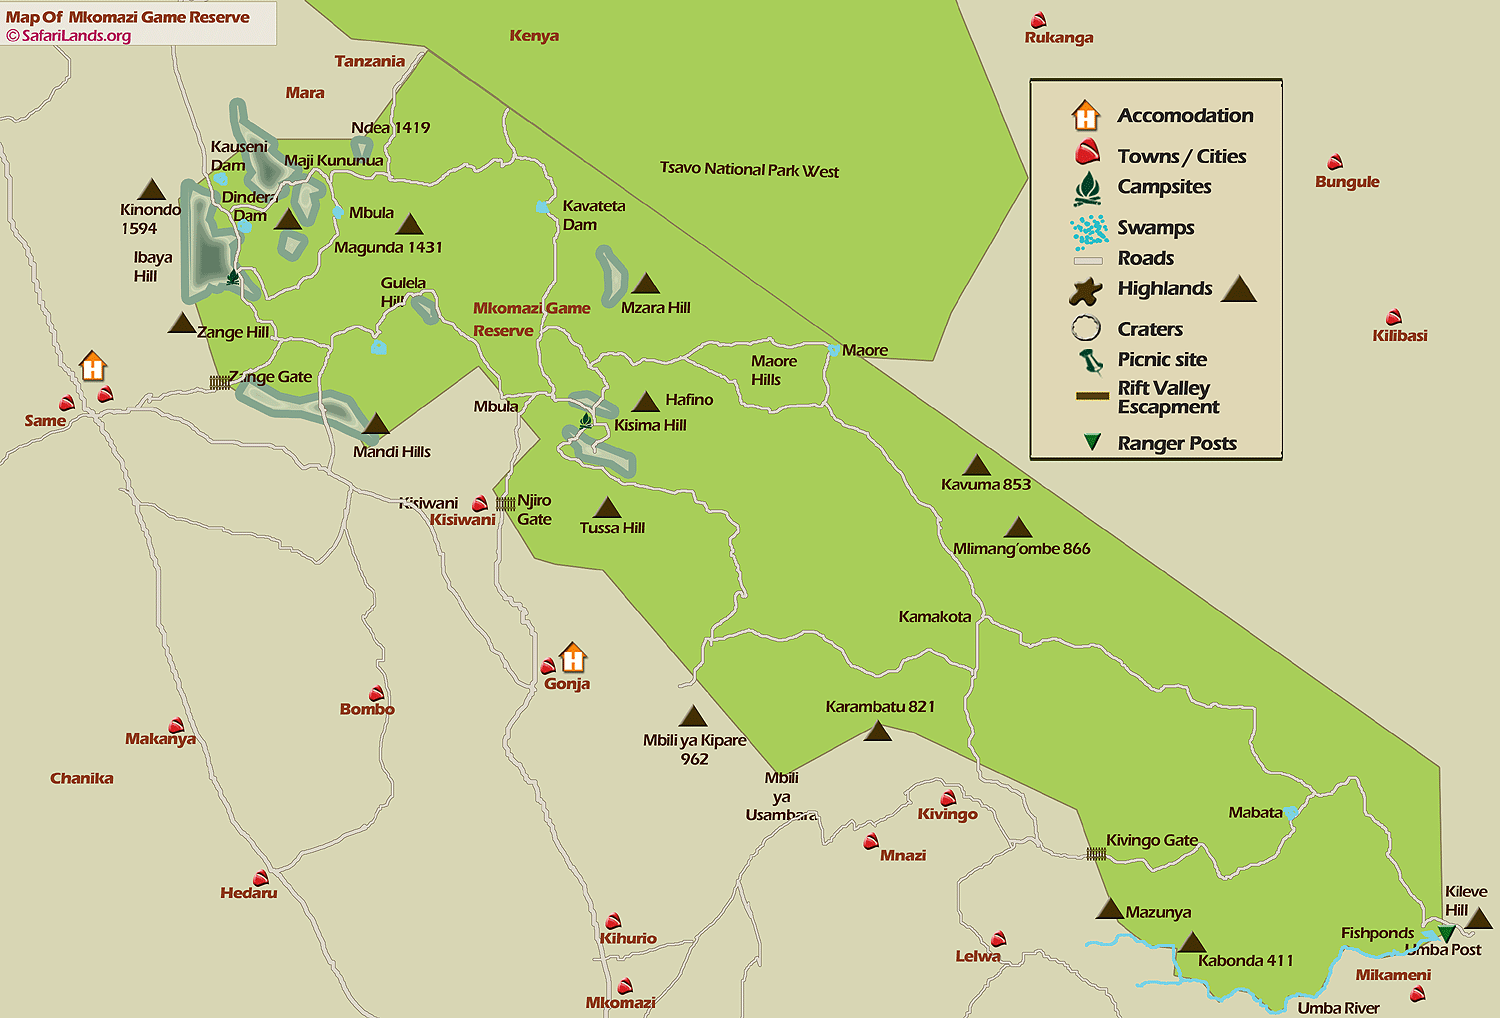 Map of the Mkomazi Game Reserve and its sorrounding Areas